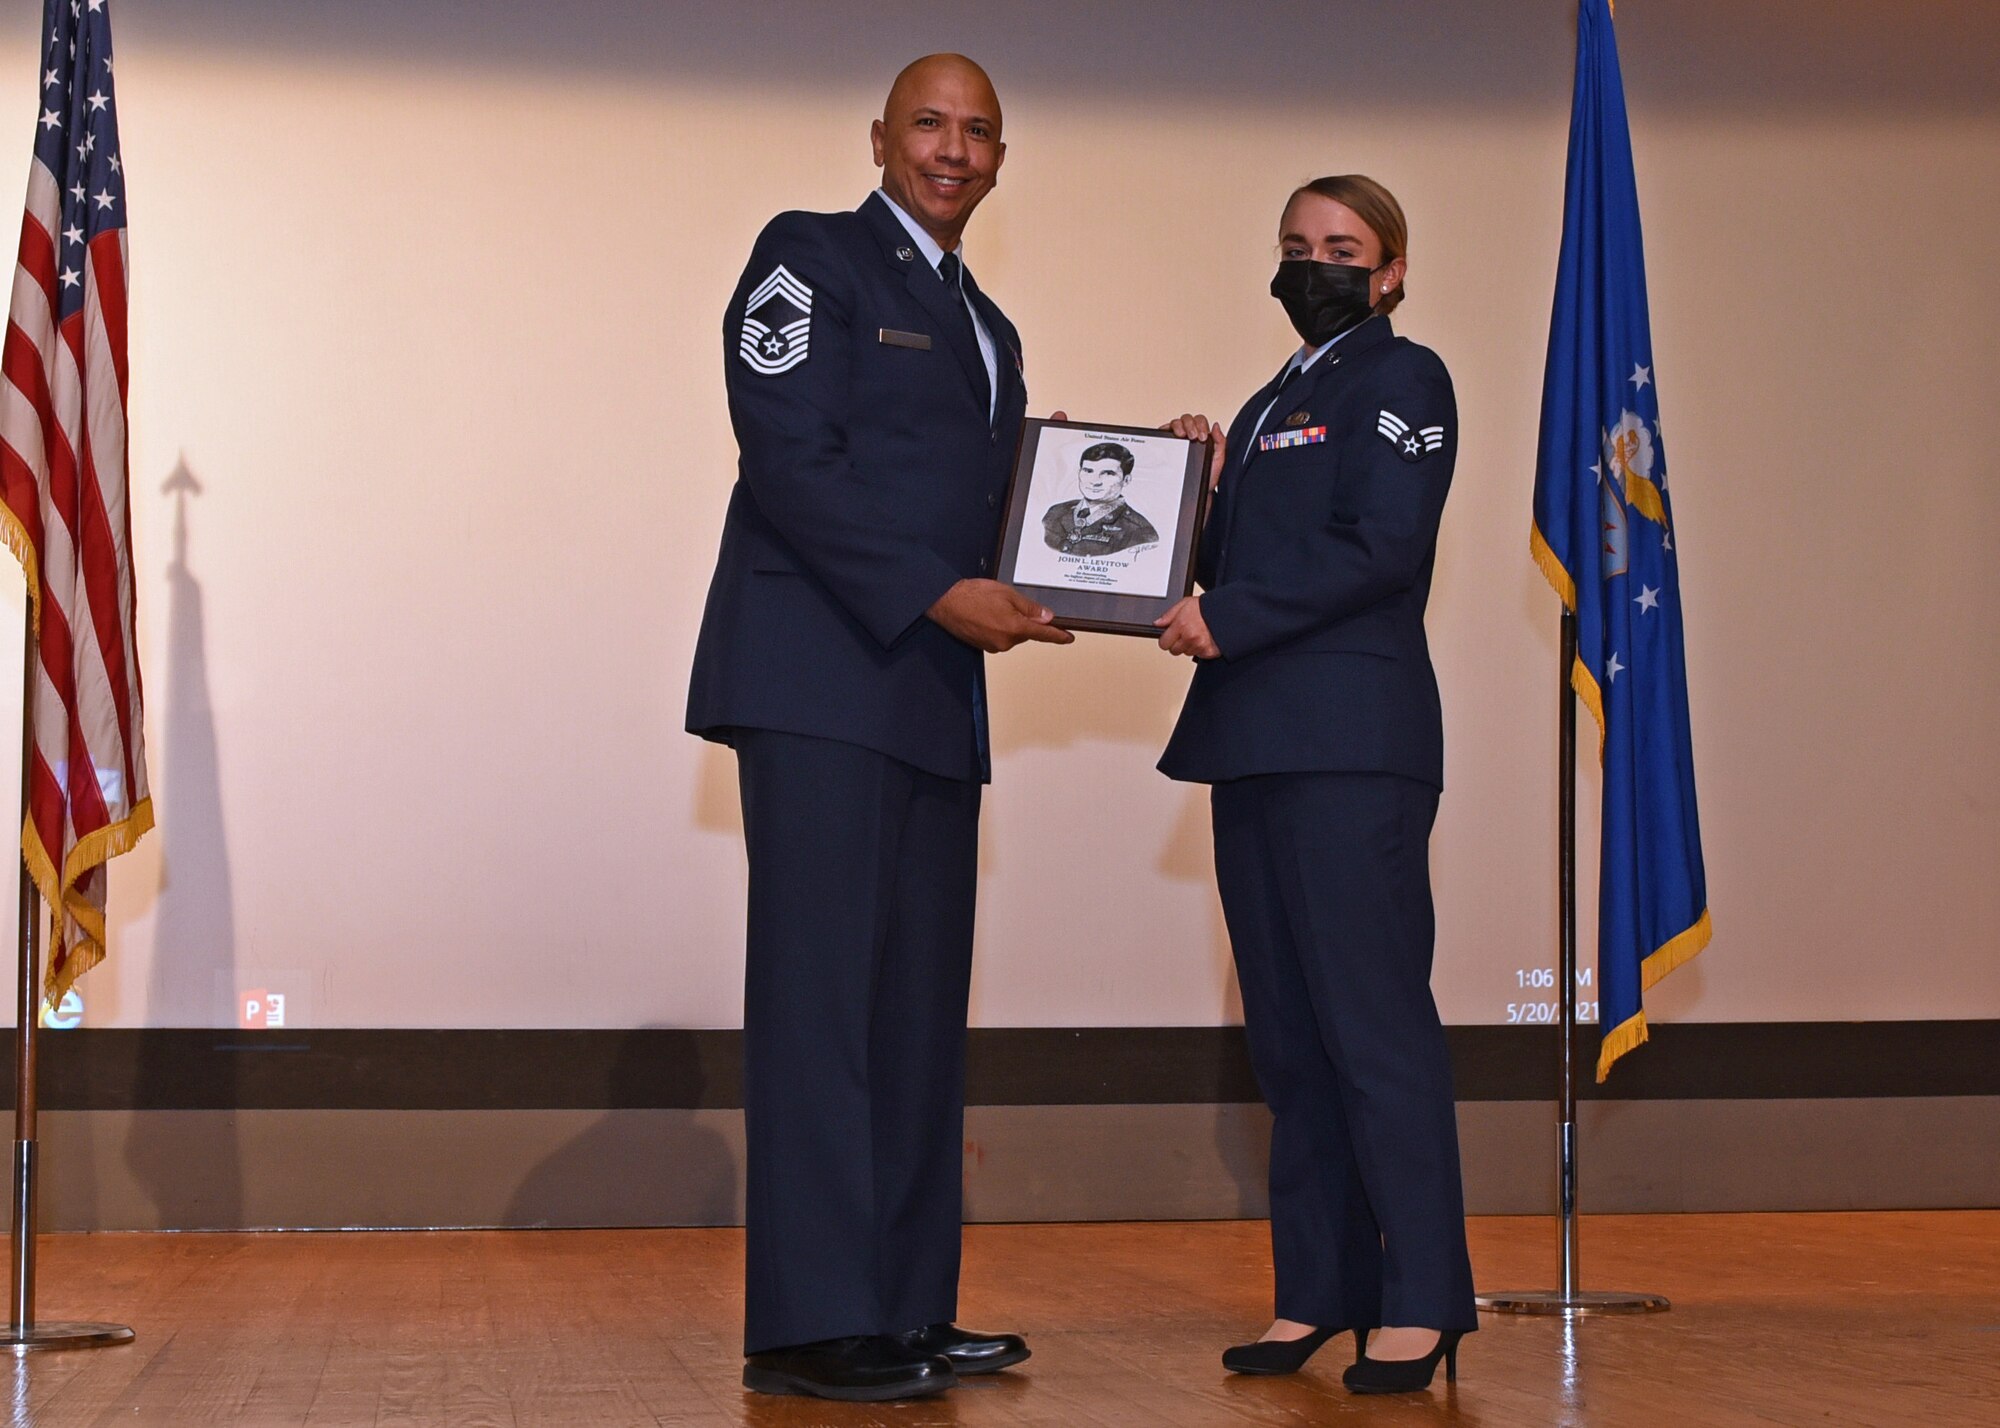 U.S. Air Force Chief Master Sgt. Edward Vargas, 47th Medical Group superintendent, at Laughlin Air Force Base, Texas, presents Senior Airman Madison West, 17th Comptroller Squadron financial analysis technician, the John L. Levitow award during West’s Airman Leadership School graduation ceremony at the Base Theater, on Goodfellow Air Force Base, Texas, May 20, 2021. The John L. Levitow award is the highest award possible in professional military education and is based upon all performance tasks, peer stratifications and the capstone exercise. (U.S. Air Force photo by Senior Airman Abbey Rieves)